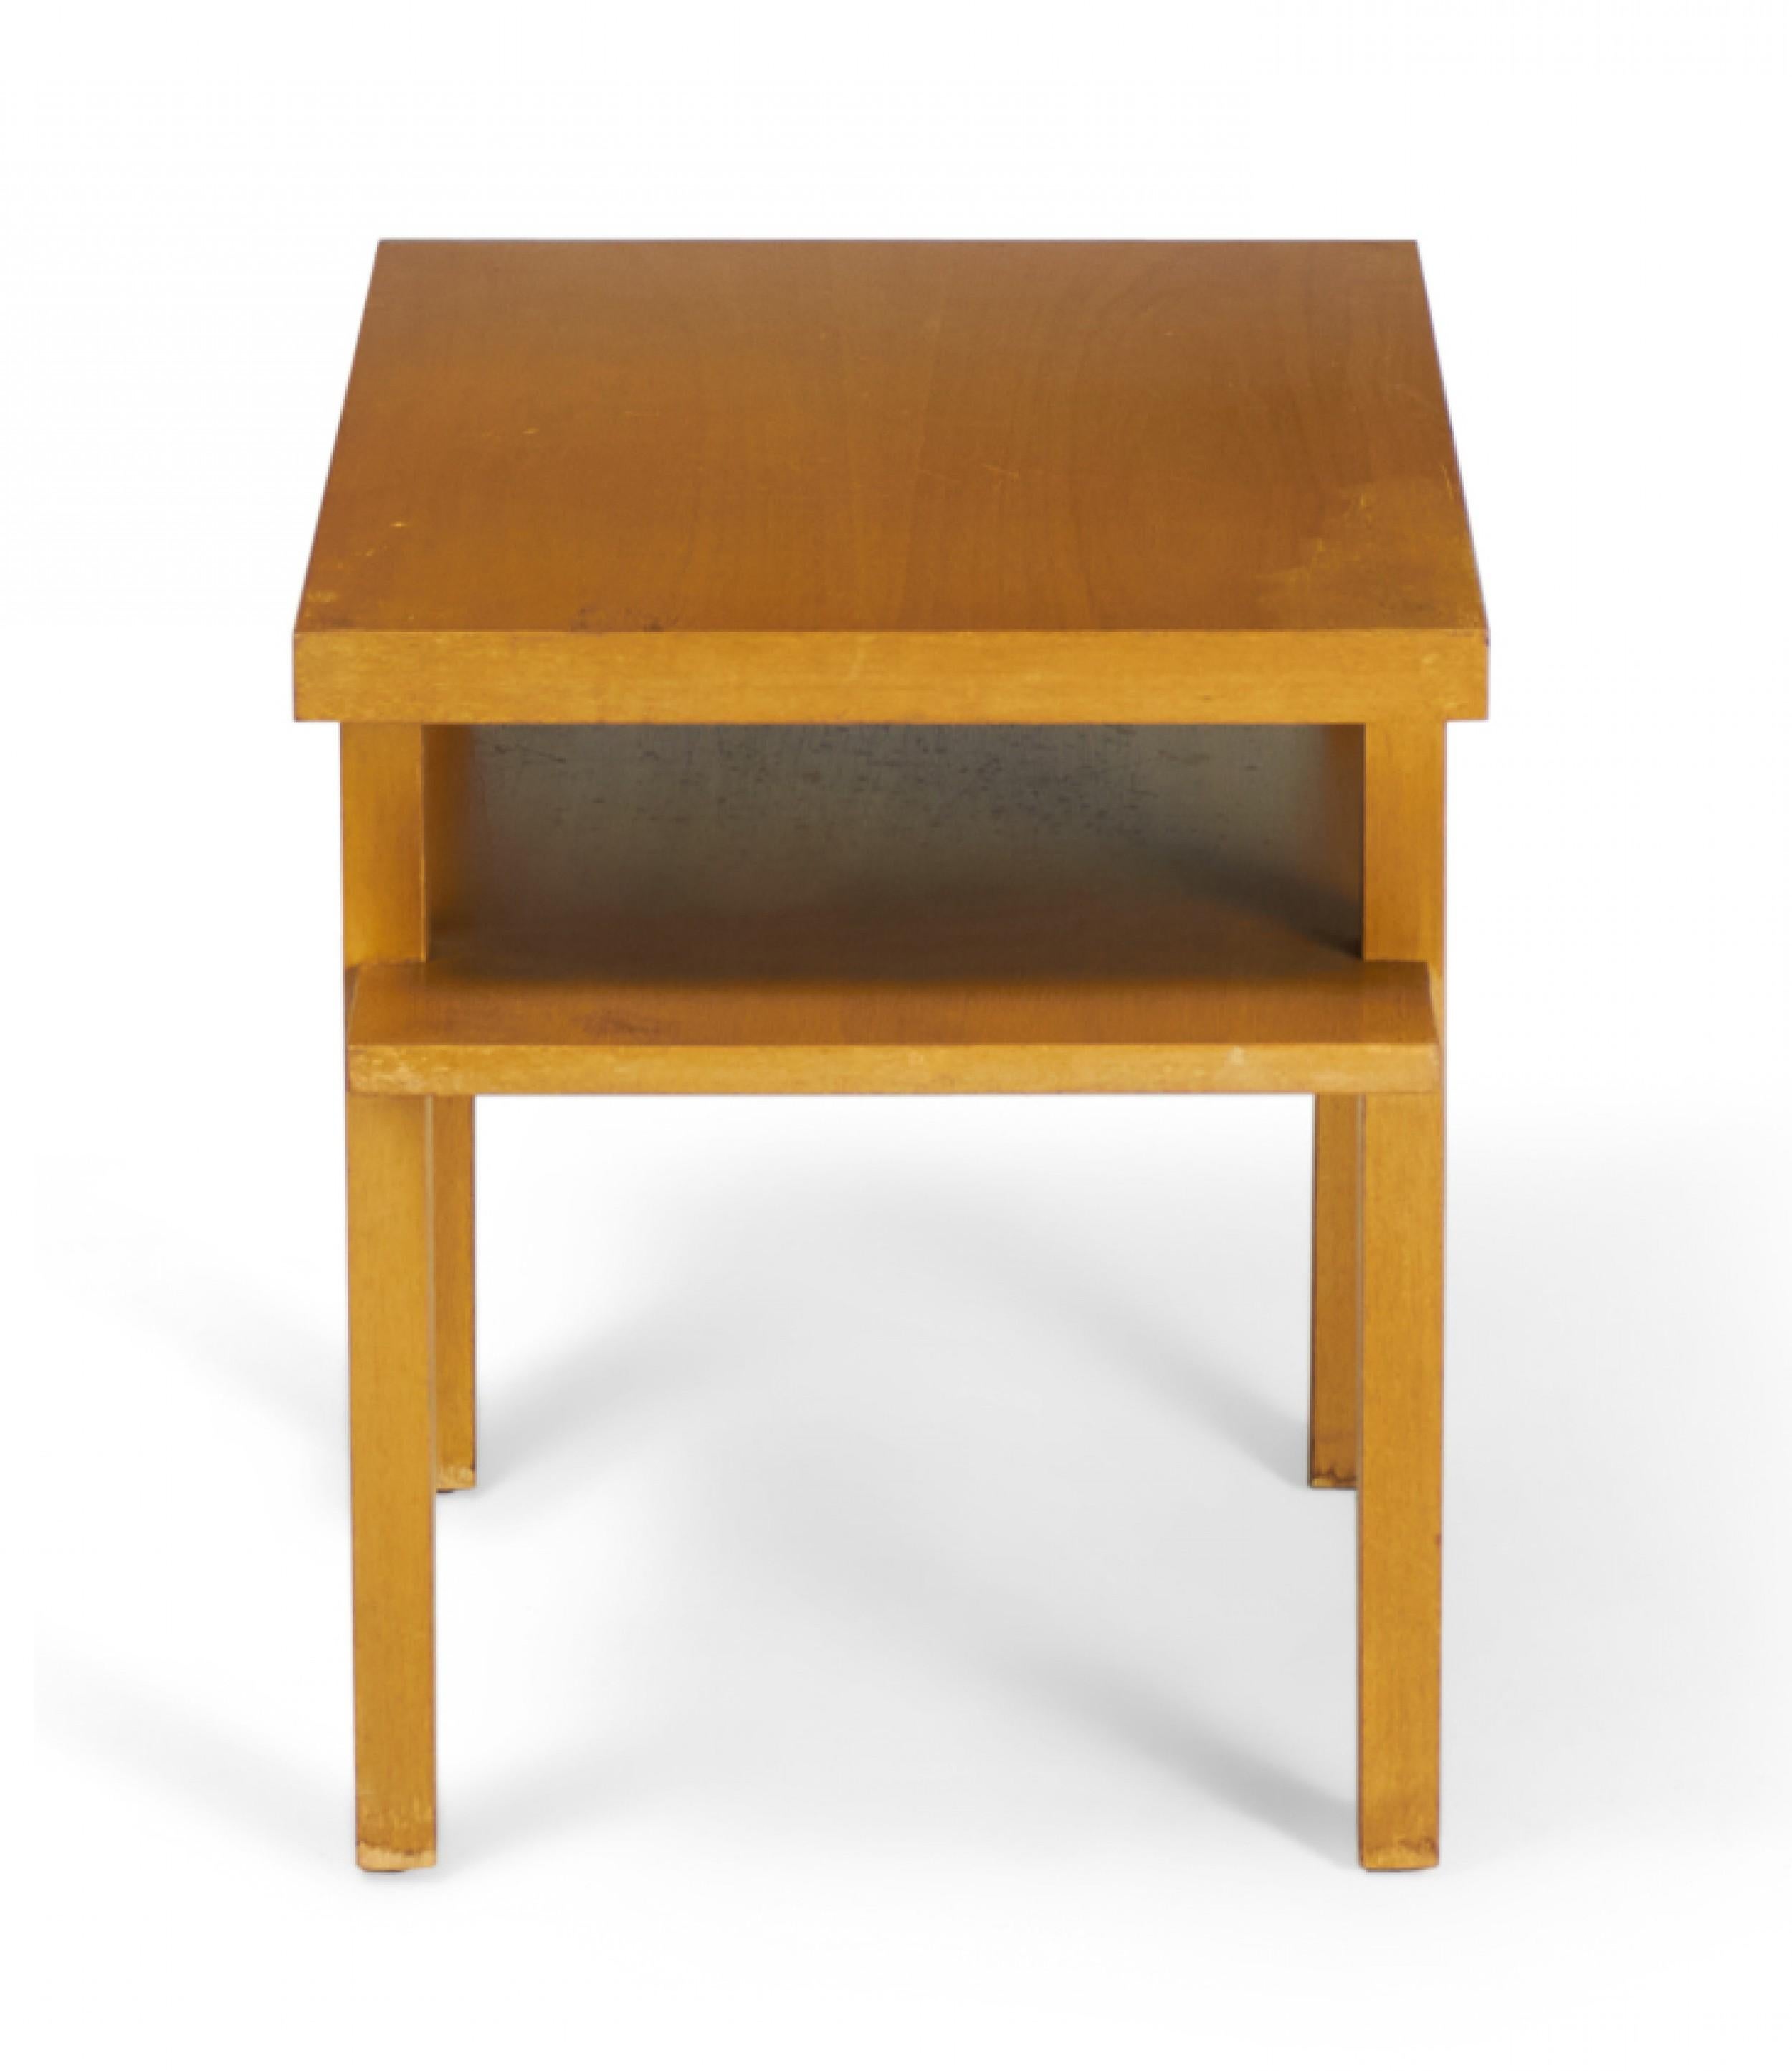 20th Century Widdicomb Mid-Century American Blond Maple Cantilever Side / End Table For Sale